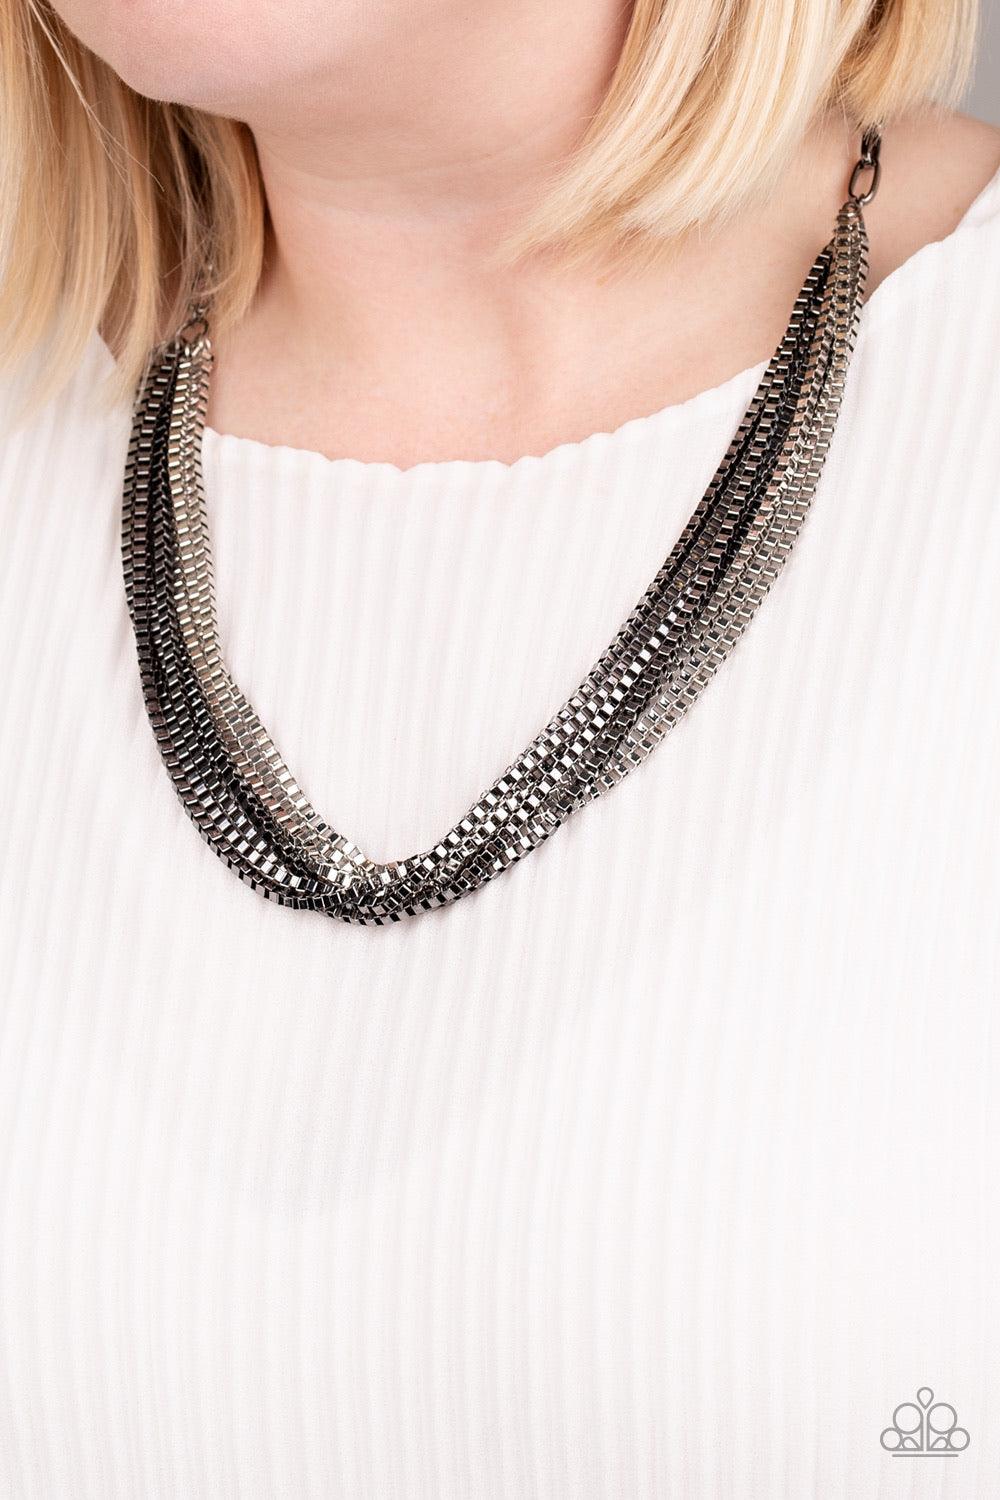 Paparazzi Accessories Beat Box Queen - Black Attached to a thick gunmetal chain, a collision of silver and gunmetal box chains layer below the collar for an edgy mix. Features an adjustable clasp closure. Sold as one individual necklace. Includes one pair